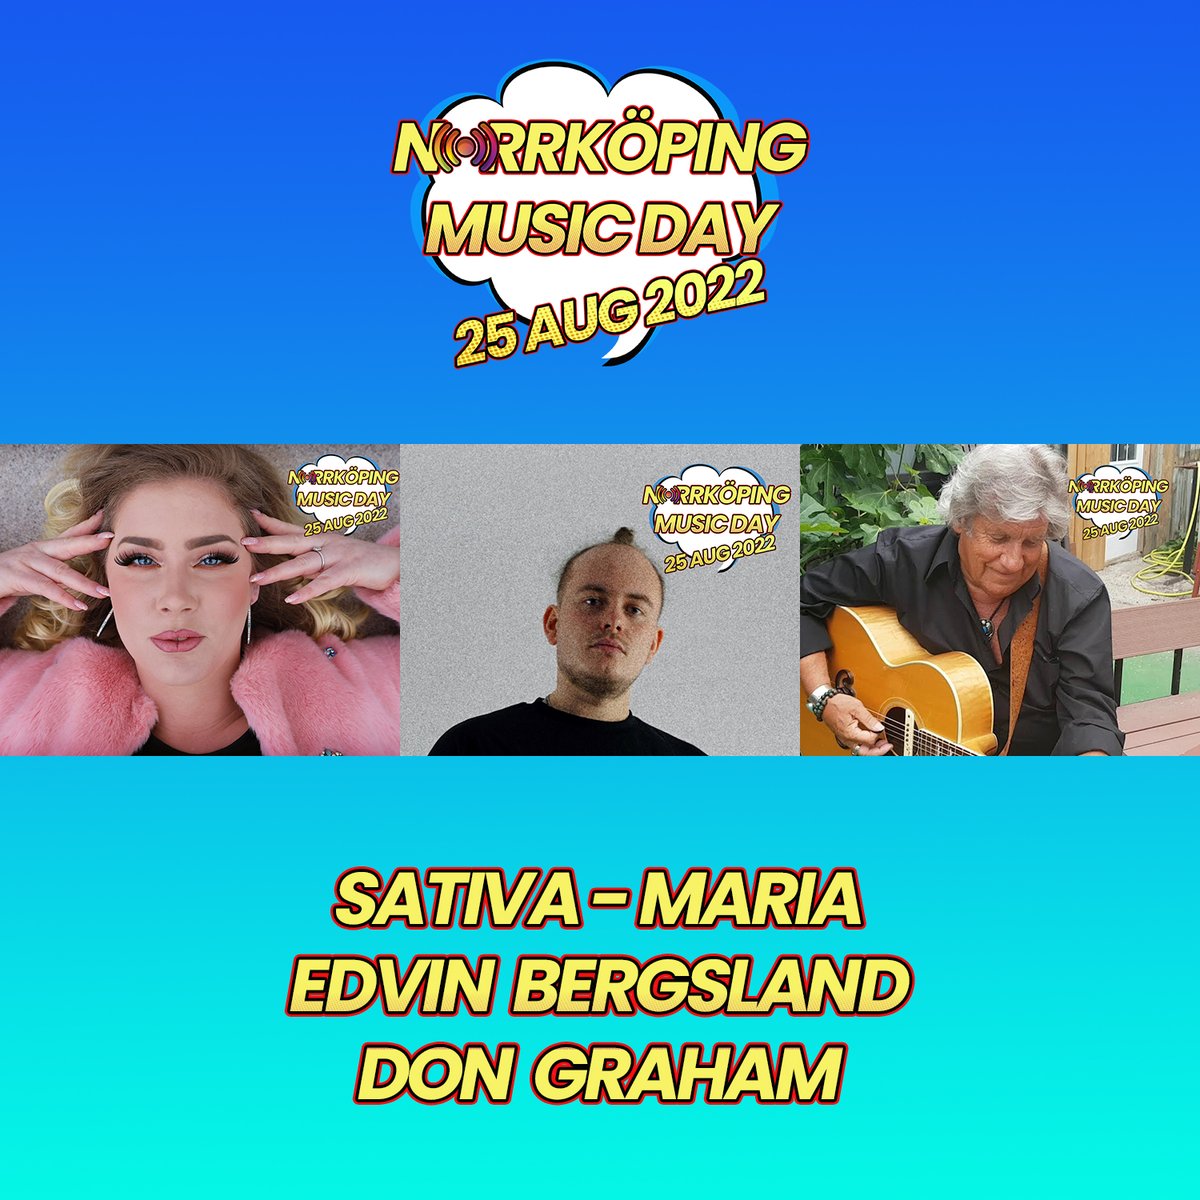 Norrköping Music Day reveals the artist that plays on 2022 edition. Welcome to see Edvin Bergsland, Don Graham and Sativa-Maria 25 of august. Free entrance. Schedule on Future Echoes homepage. #norrköping #norrköpingmusicday #futureechoes